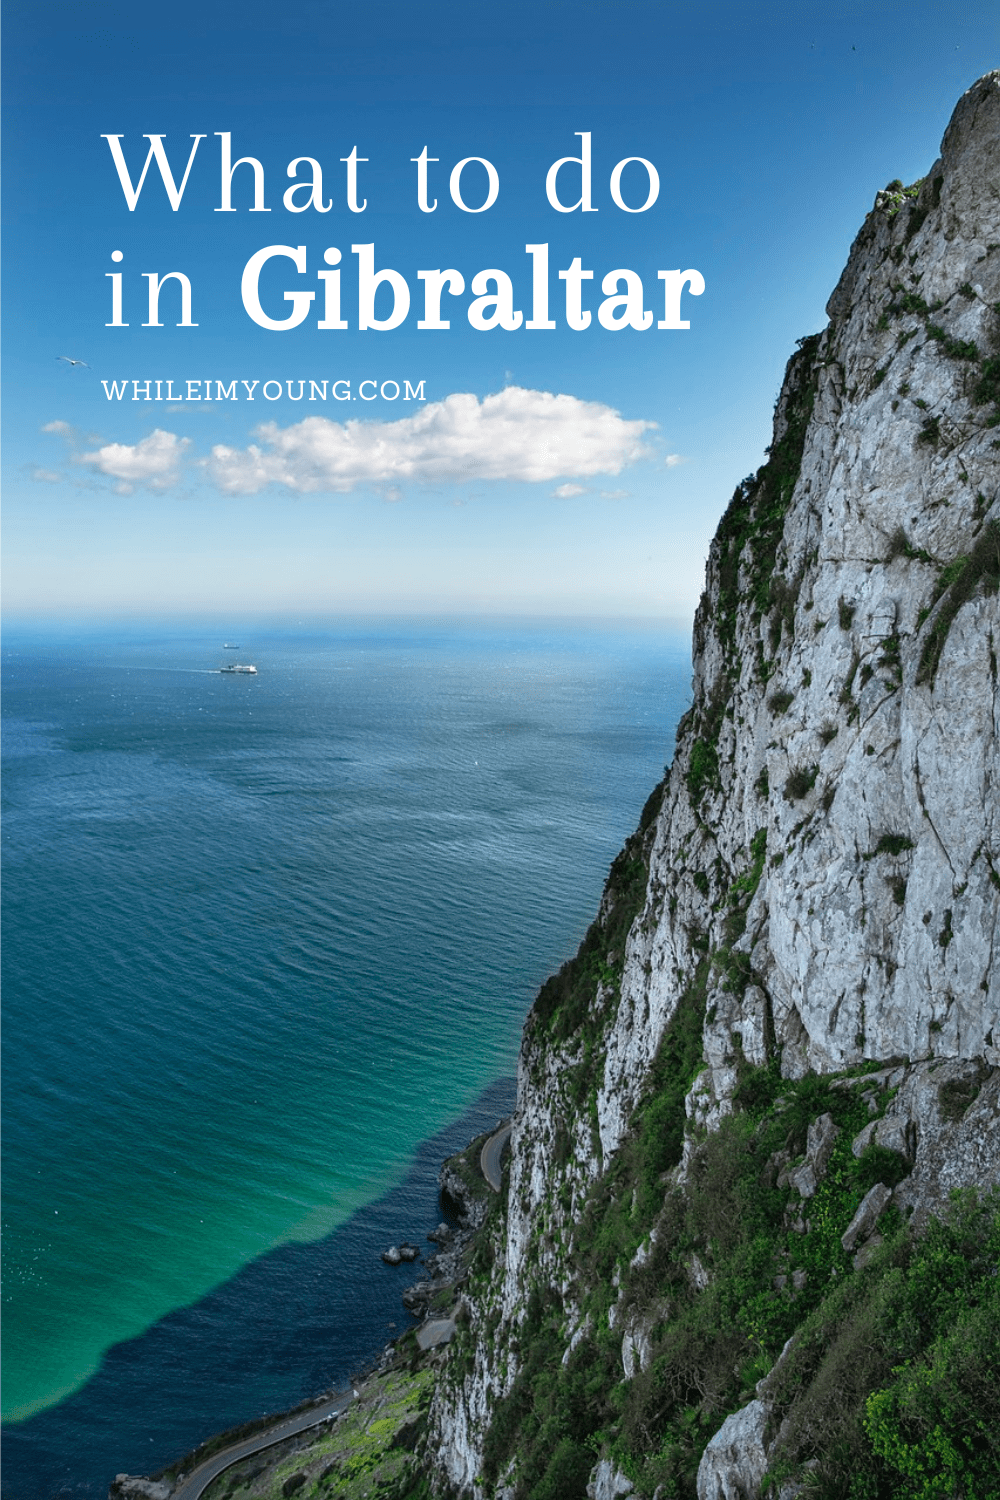 What to do in Gibraltar